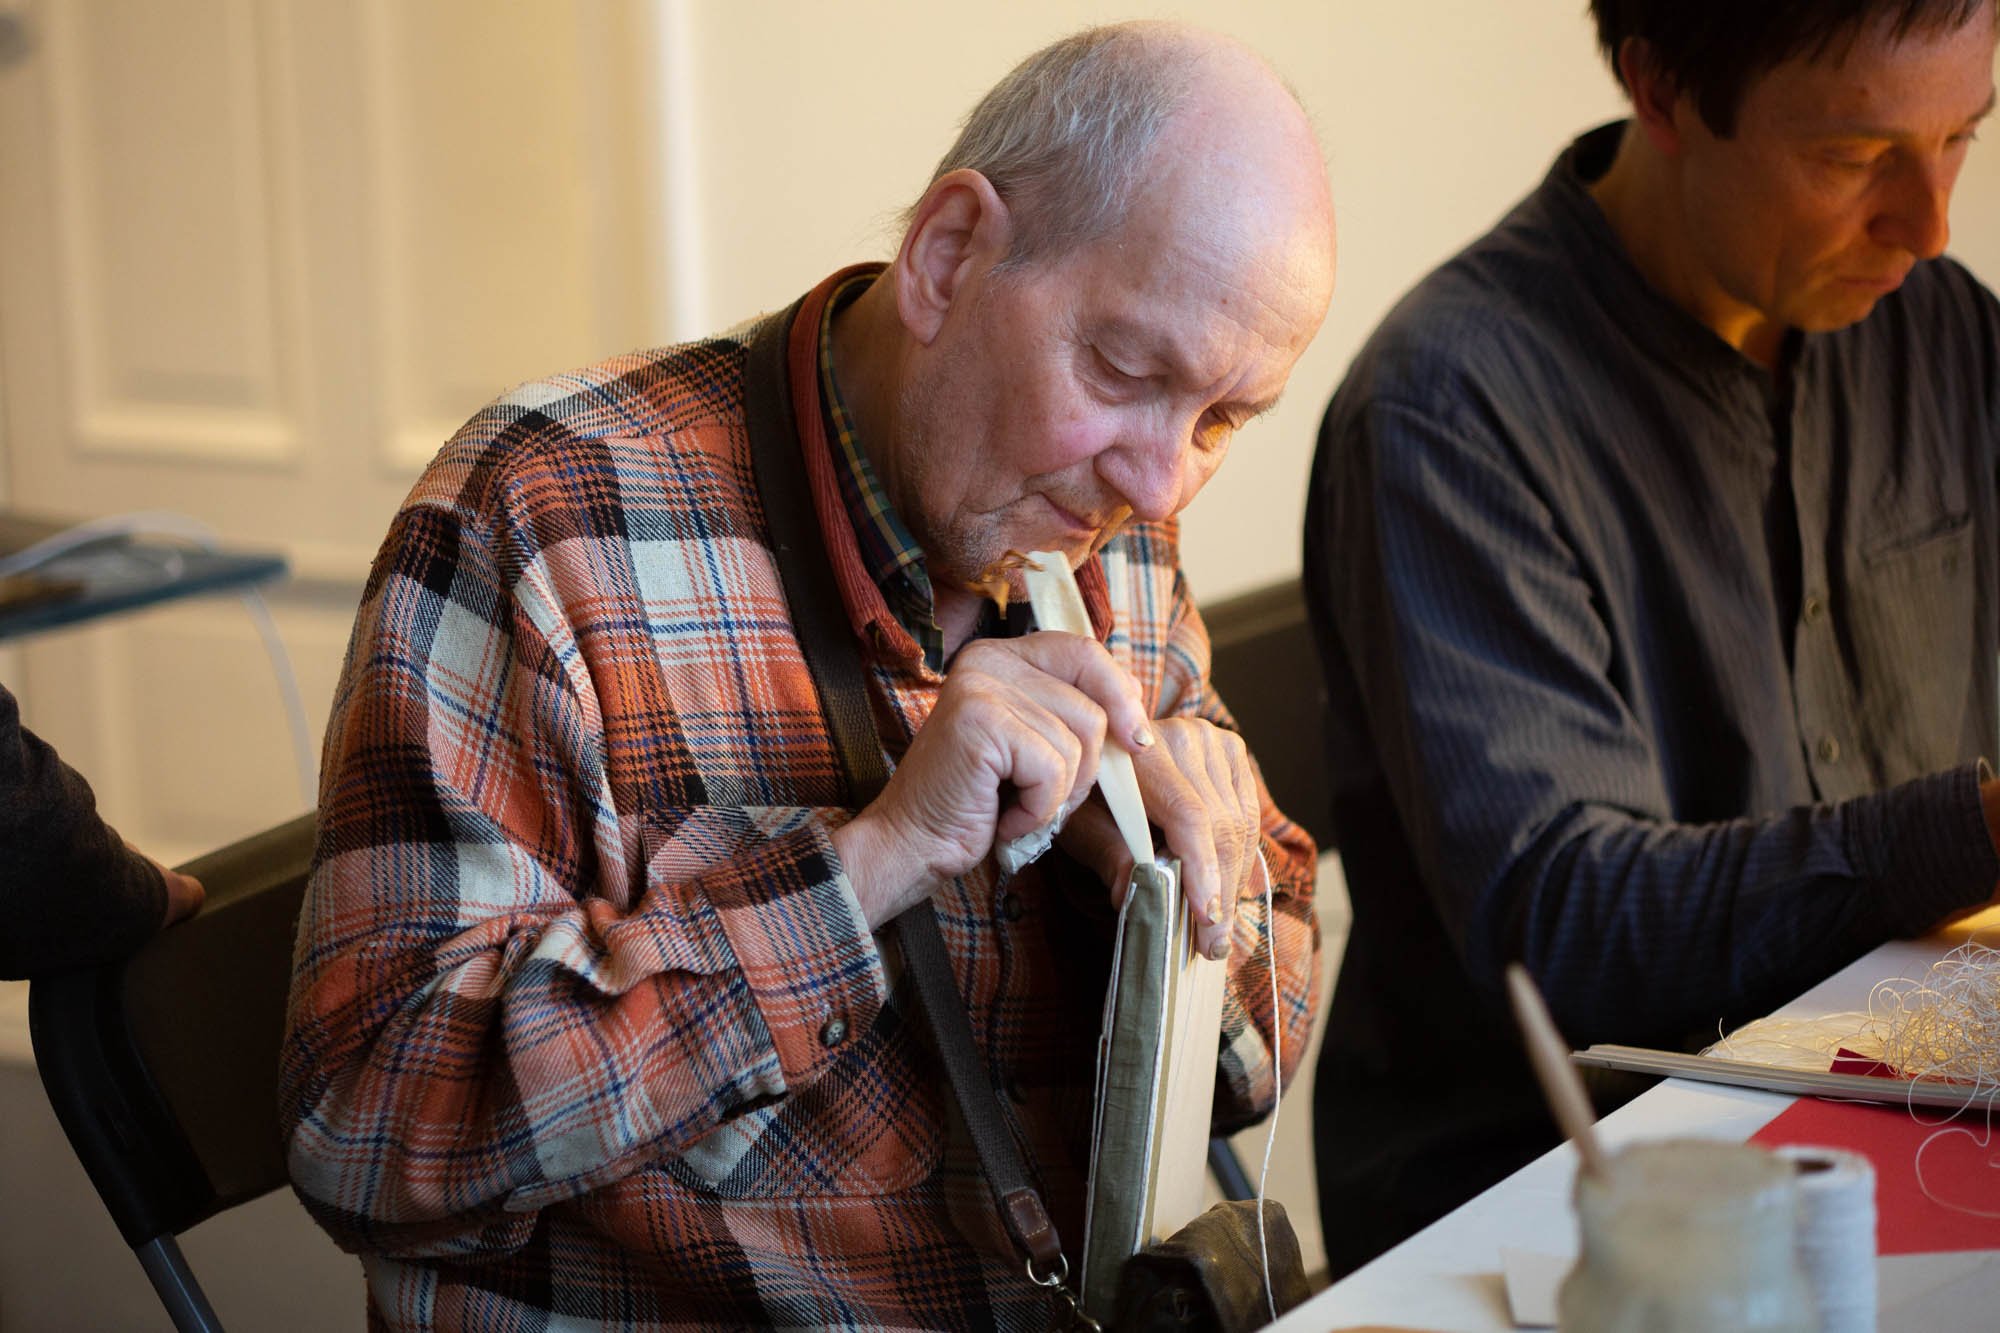  Hans Ragnar Mathisen/Elle-Hánsa/Keviselie at one of his many book binding workshops in Tromsø. This particular one was part of the Open Out Festival 2020. Photo: Daniela Toma/Open Out Festival 